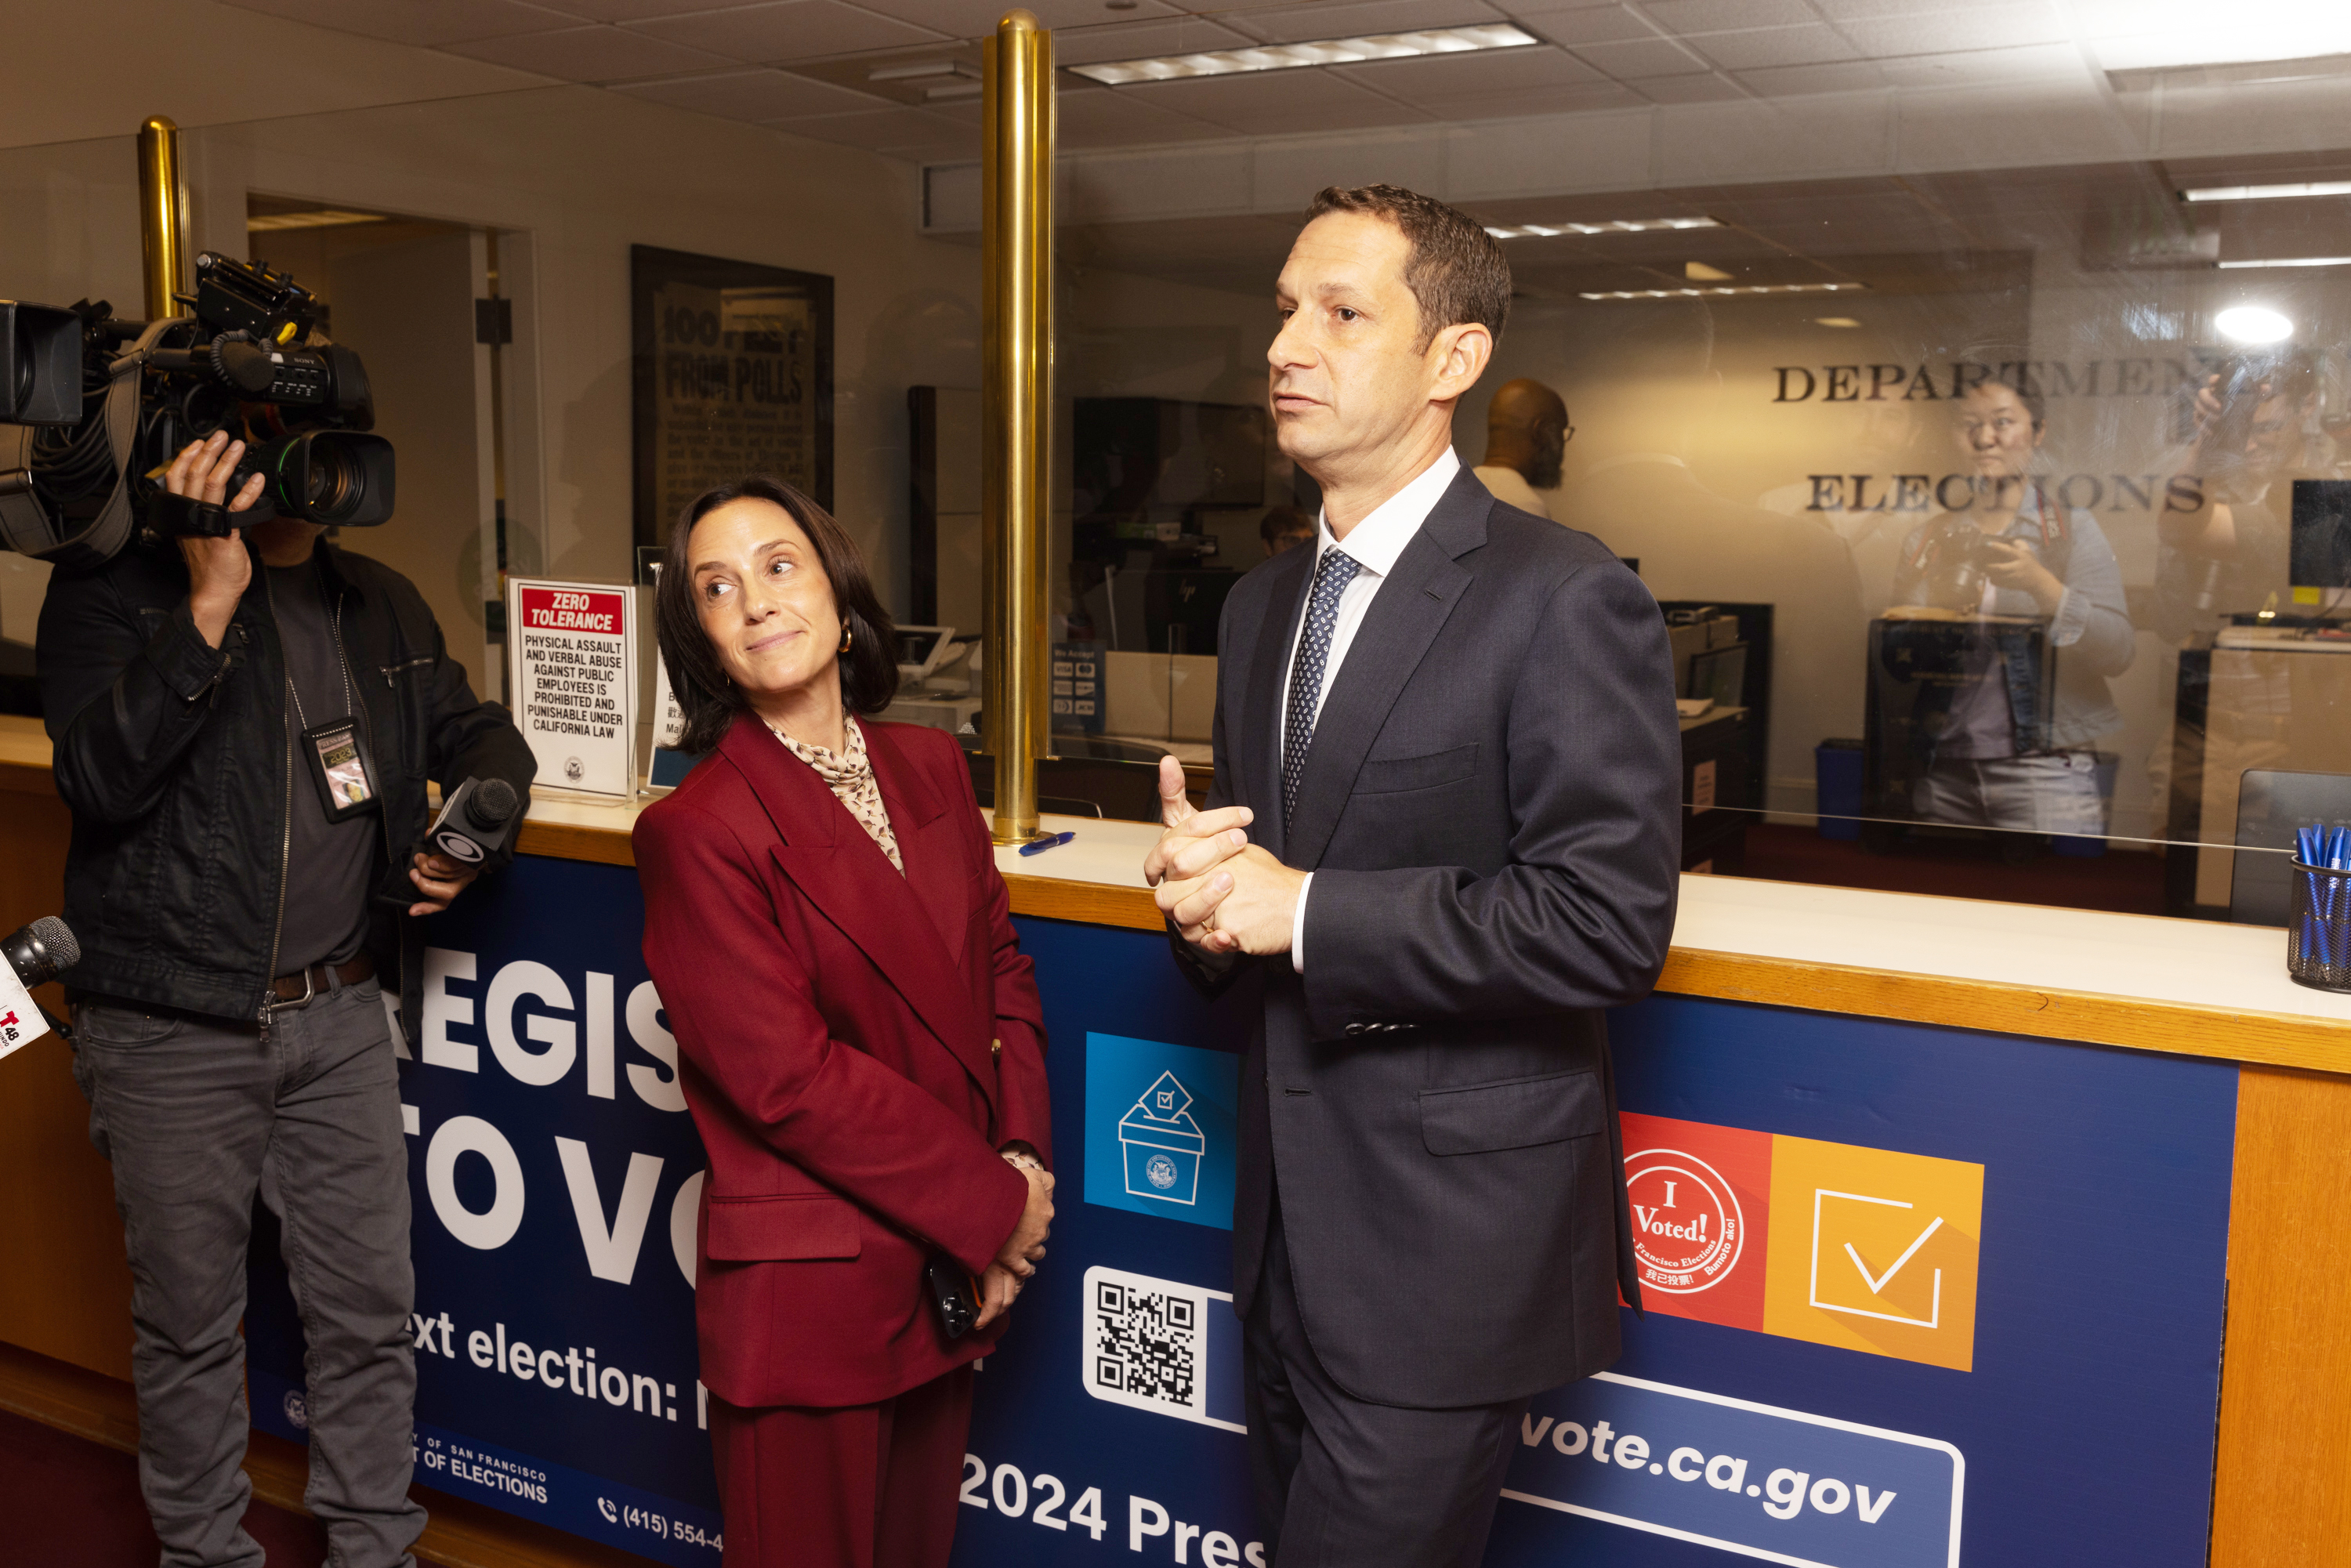 Becca Prowda and Daniel Lurie stand at a counter with &quot;Department of Elections&quot; signage.